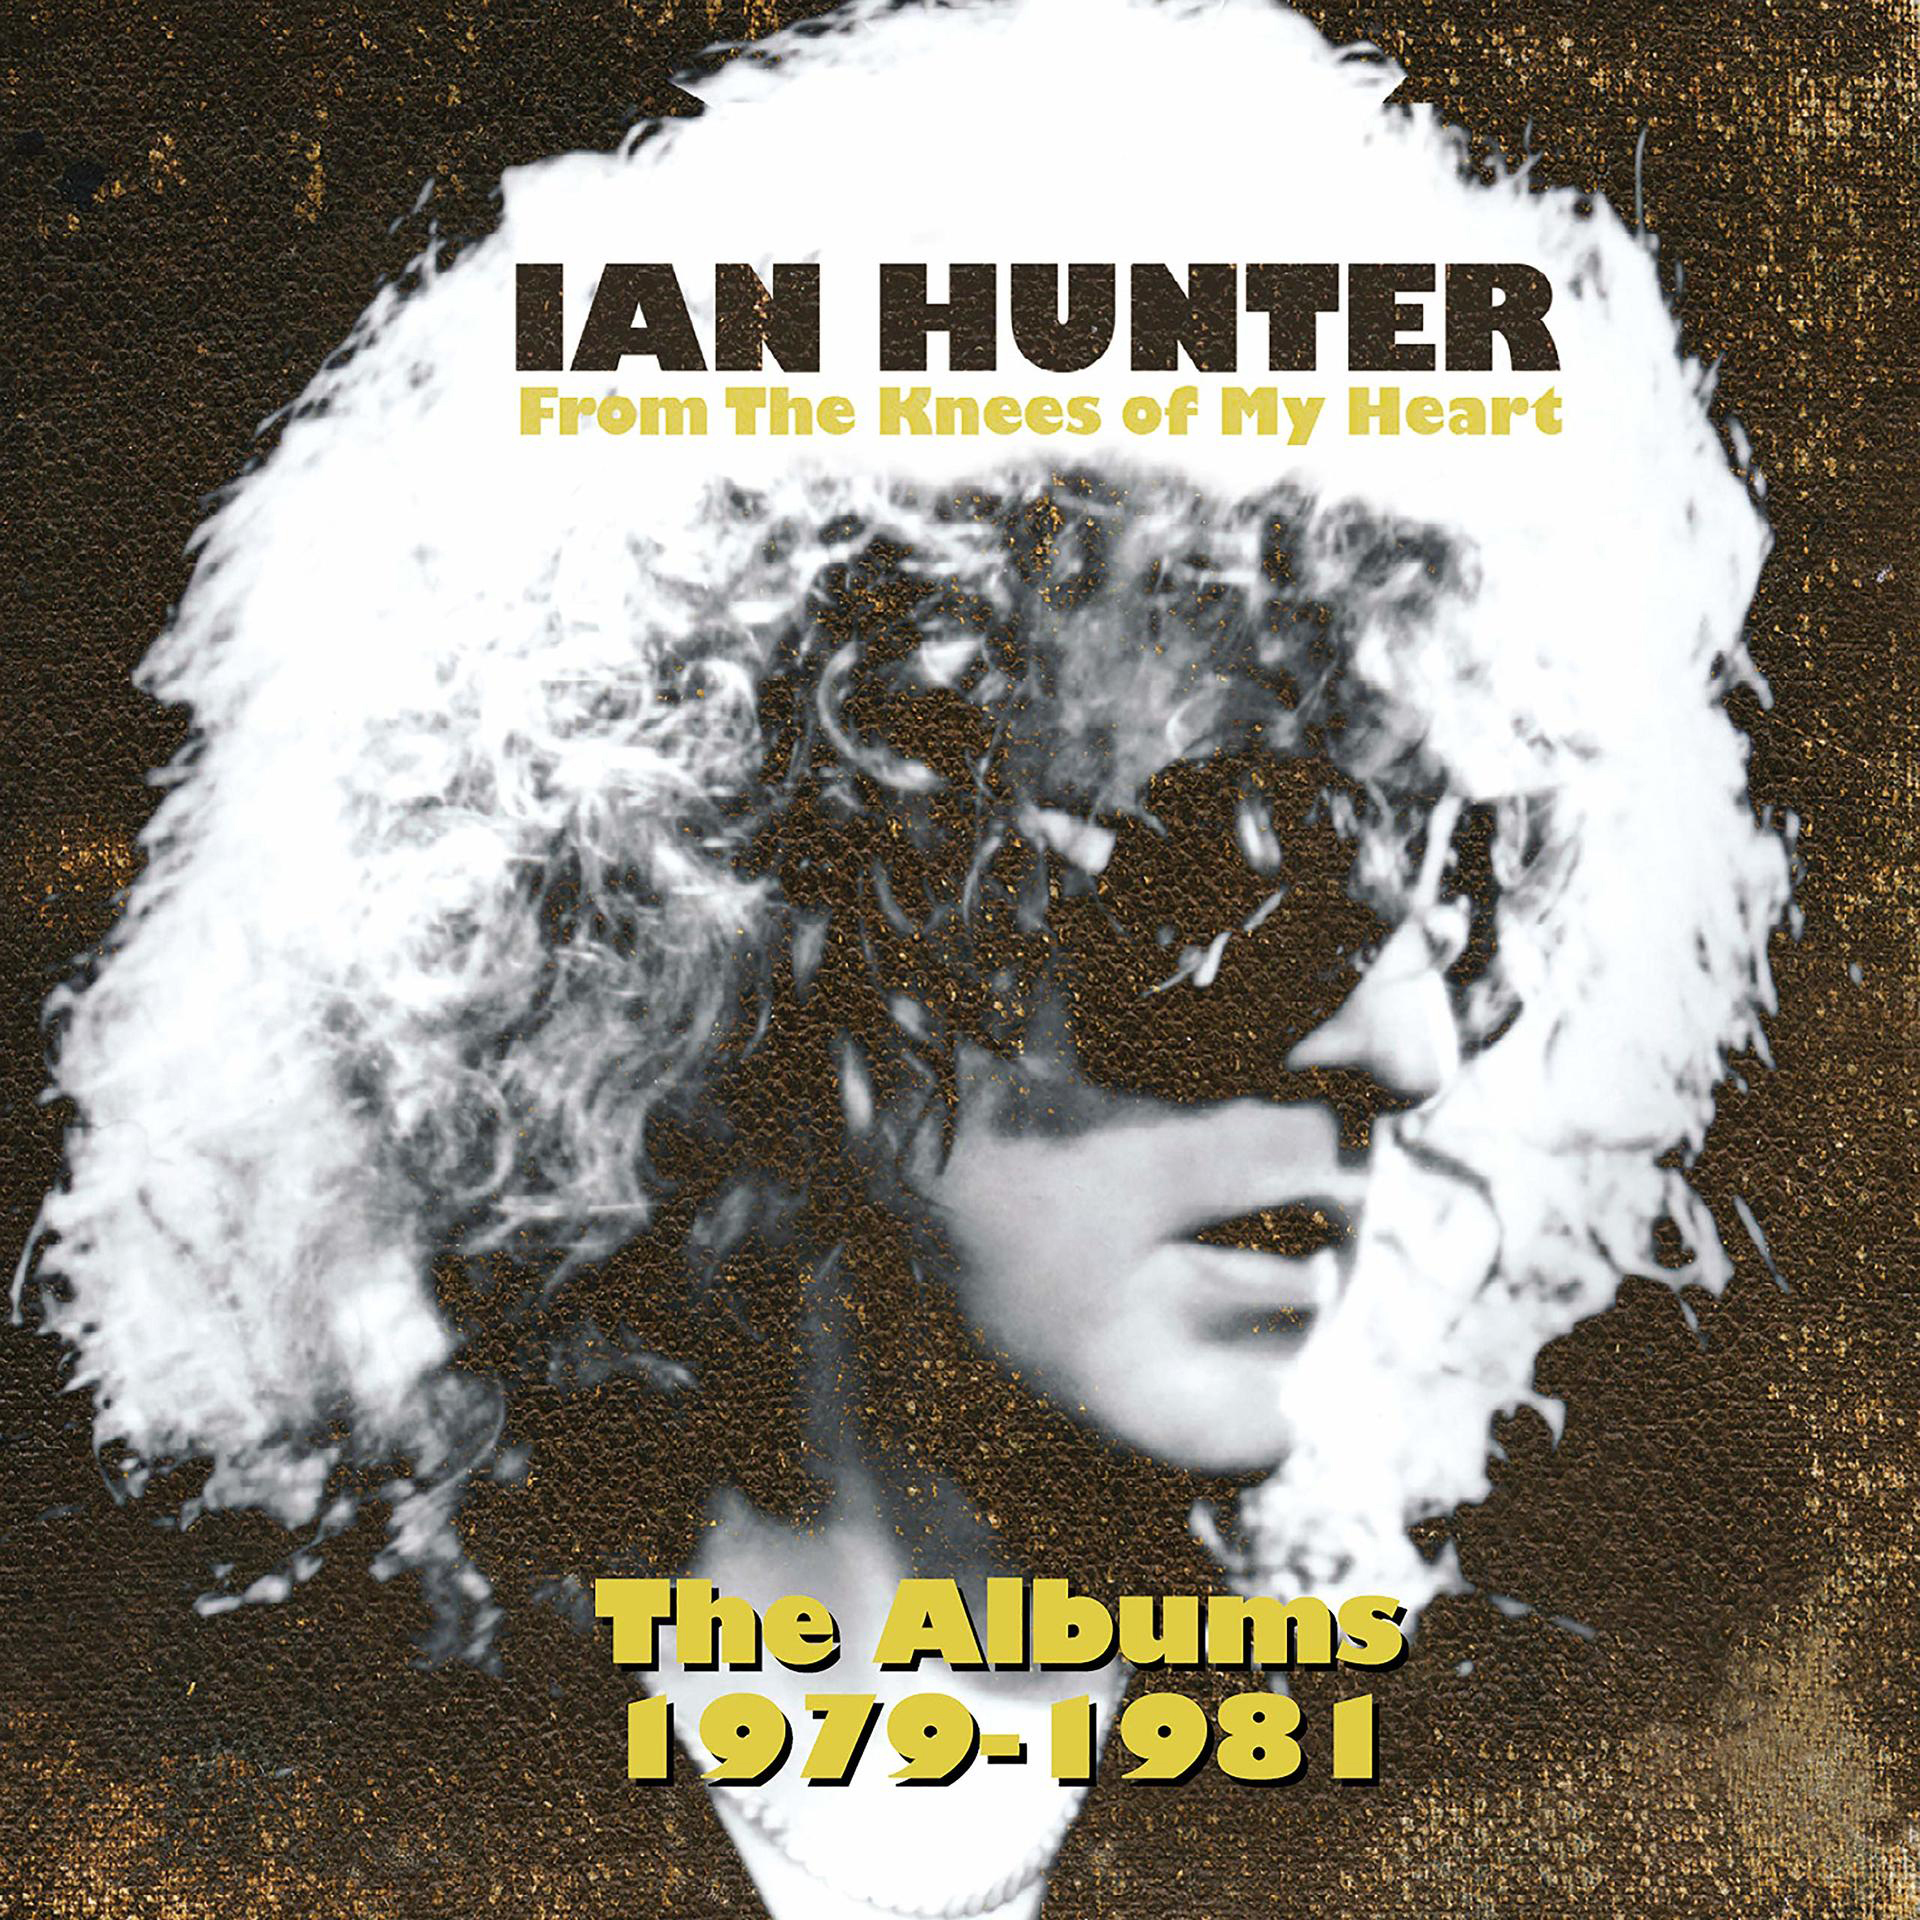 Knees 1979-1981) The Of (CD) (The - From Ian Hunter My Heart - Albums